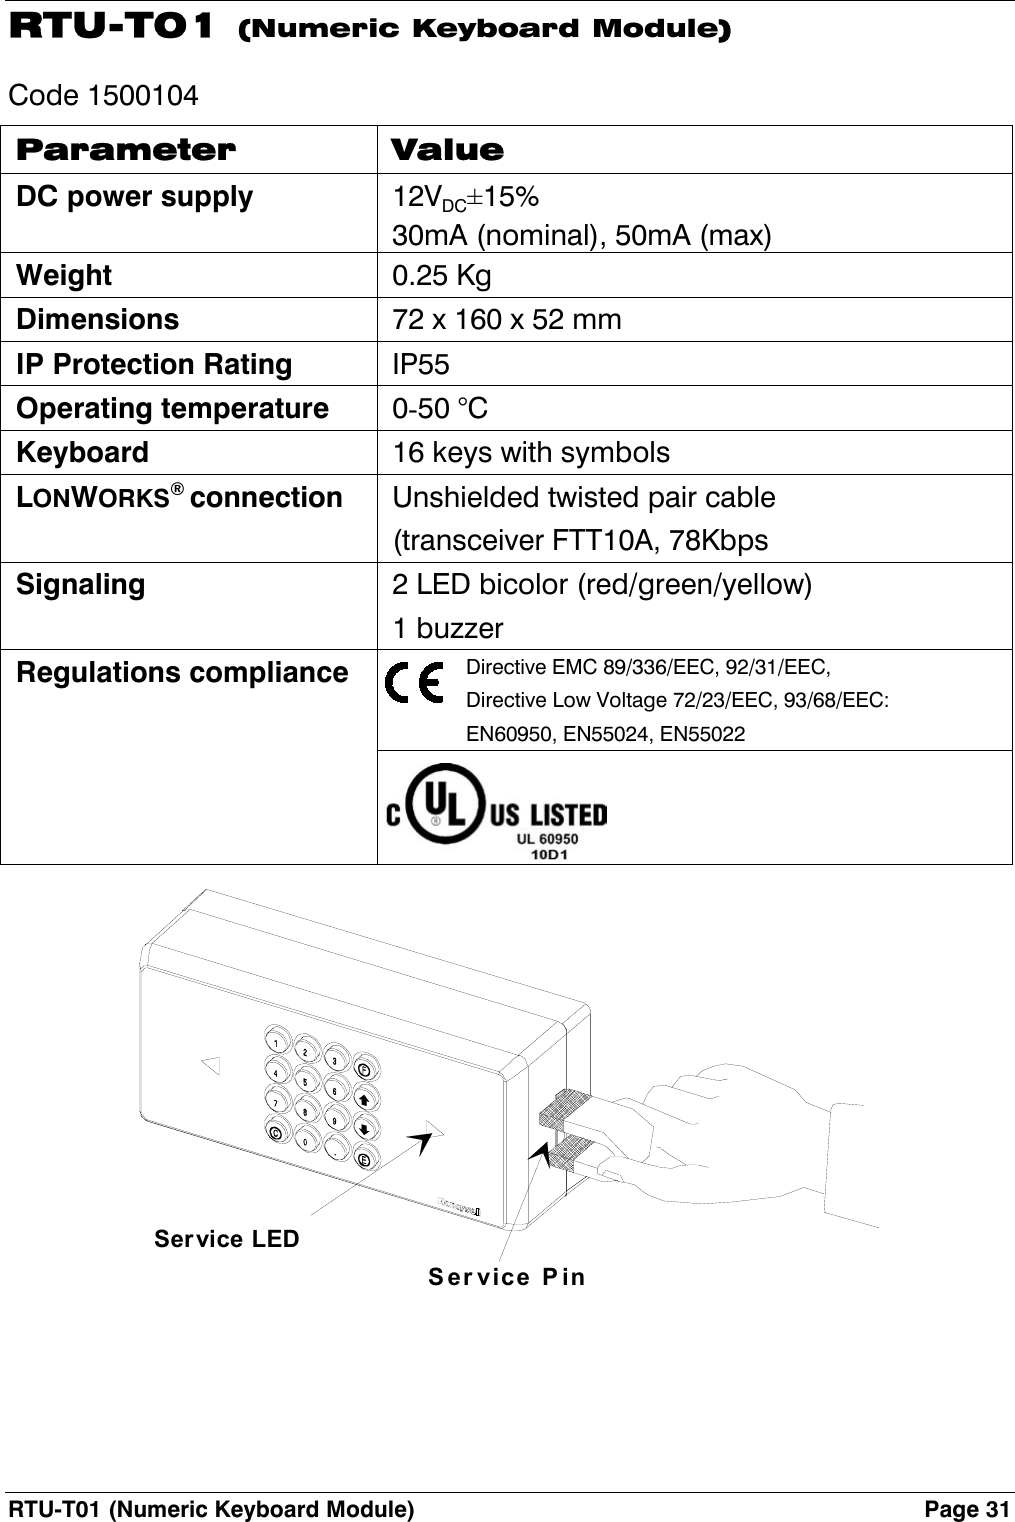 RTU-T01 (Numeric Keyboard Module)  Page 31 RTU-T01 (Numeric Keyboard Module) Code 1500104 Parameter Value DC power supply 12VDC±15% 30mA (nominal), 50mA (max) Weight 0.25 Kg Dimensions  72 x 160 x 52 mm IP Protection Rating IP55 Operating temperature 0-50 °C Keyboard  16 keys with symbols LONWORKS® connection  Unshielded twisted pair cable (transceiver FTT10A, 78Kbps Signaling  2 LED bicolor (red/green/yellow) 1 buzzer Regulations compliance  Directive EMC 89/336/EEC, 92/31/EEC, Directive Low Voltage 72/23/EEC, 93/68/EEC: EN60950, EN55024, EN55022      Ser vice LEDService Pin  